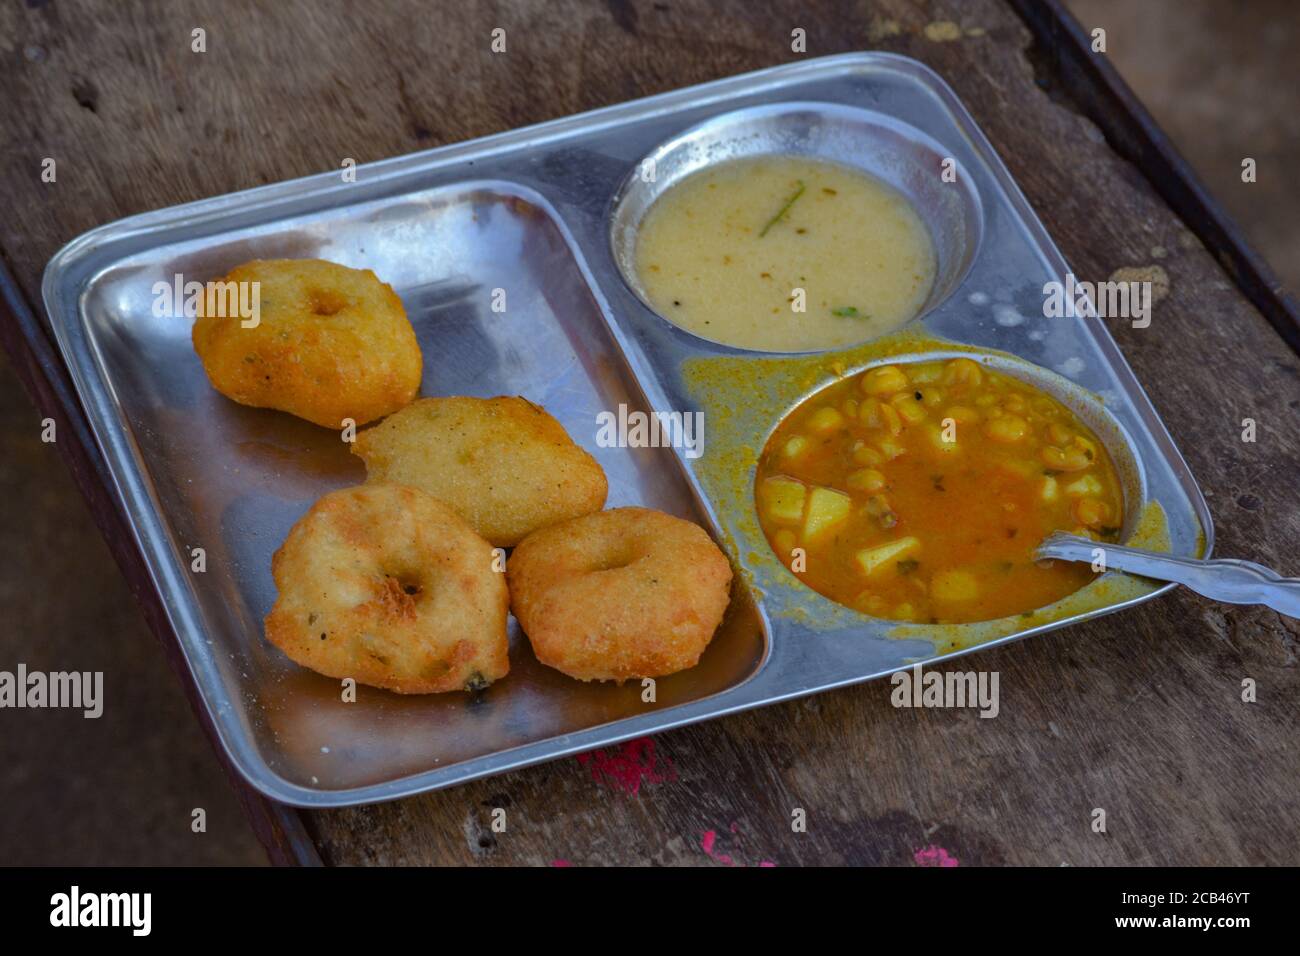 Street food Thali served on a wooden table in Amritsar, India Stock Photo